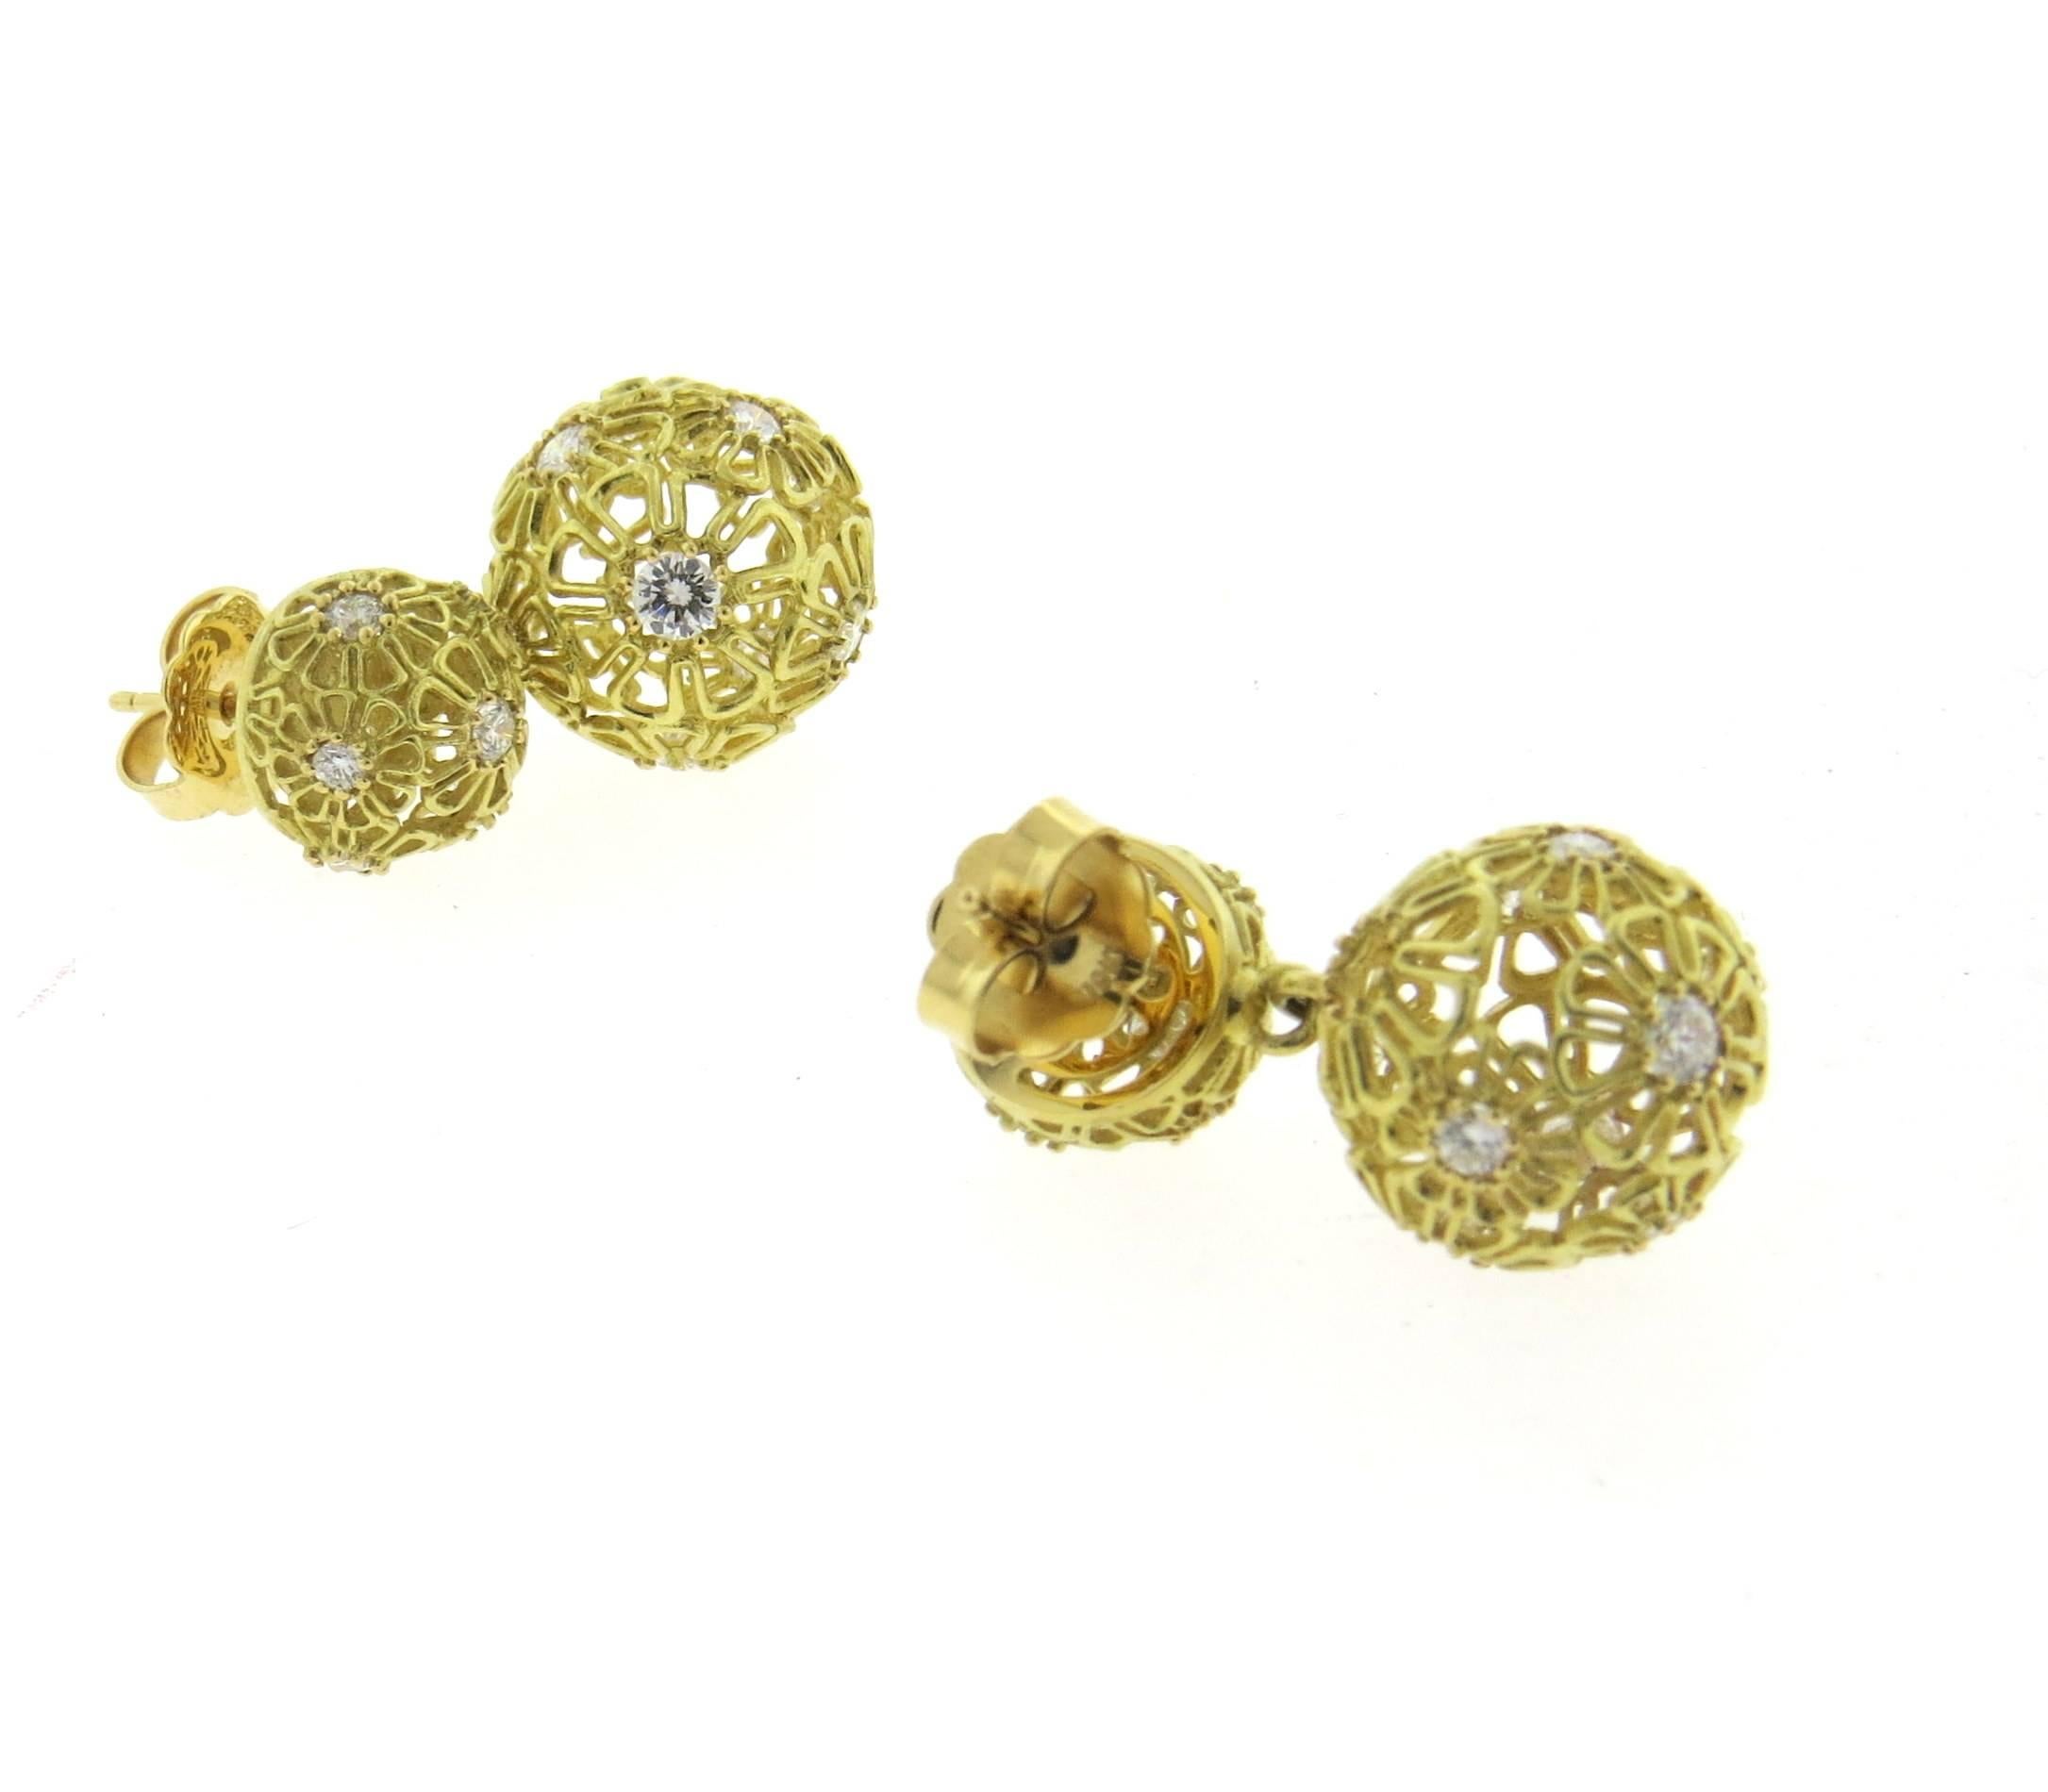 A pair of 18k yellow gold drop earrings, featuring two balls with flower designs, set with approx. 2.50ctw in diamonds. Earrings are 30mm long x 16mm wide (diameter of bottom ball). Marked: Morelli 750. Weight - 13.4 grams
Retail $12800